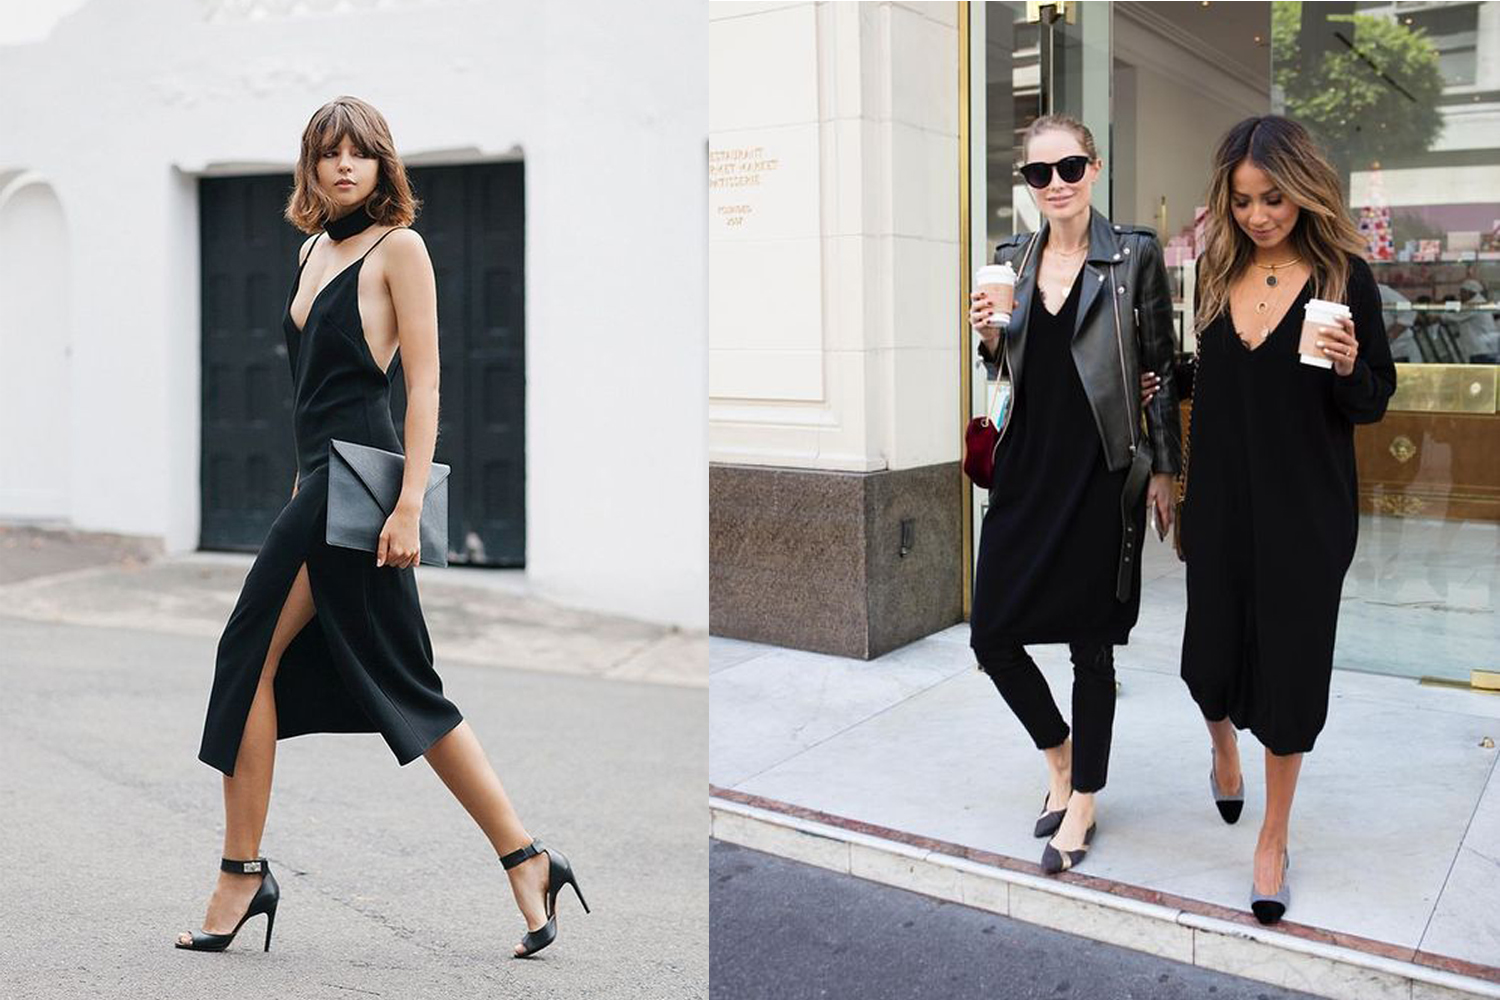 How to create 4 fresh looks with a black slip dress - Good Morning